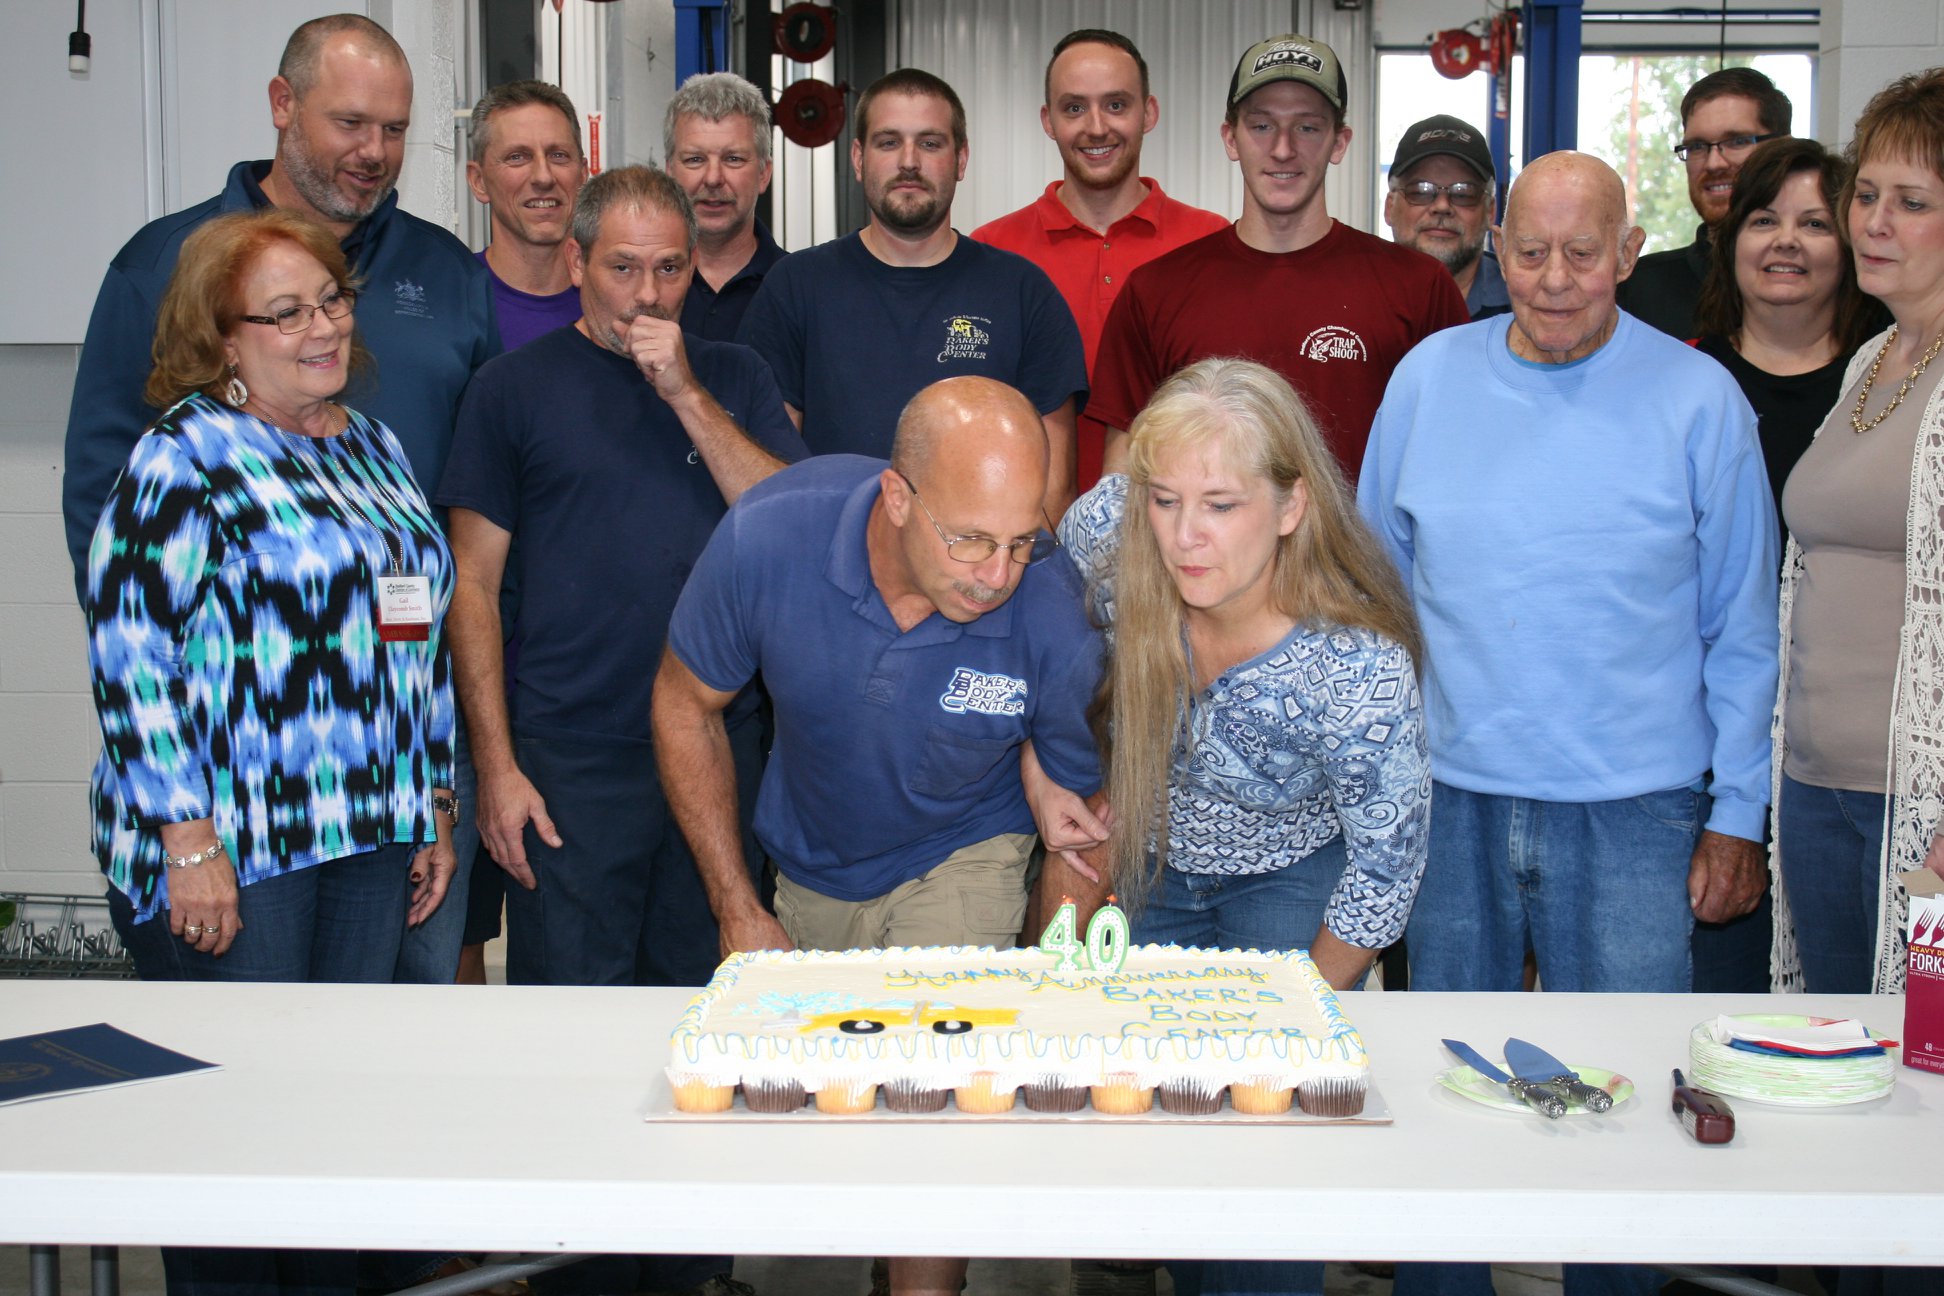 Baker's Body Center staff blowing out candles for 40th anniversary party